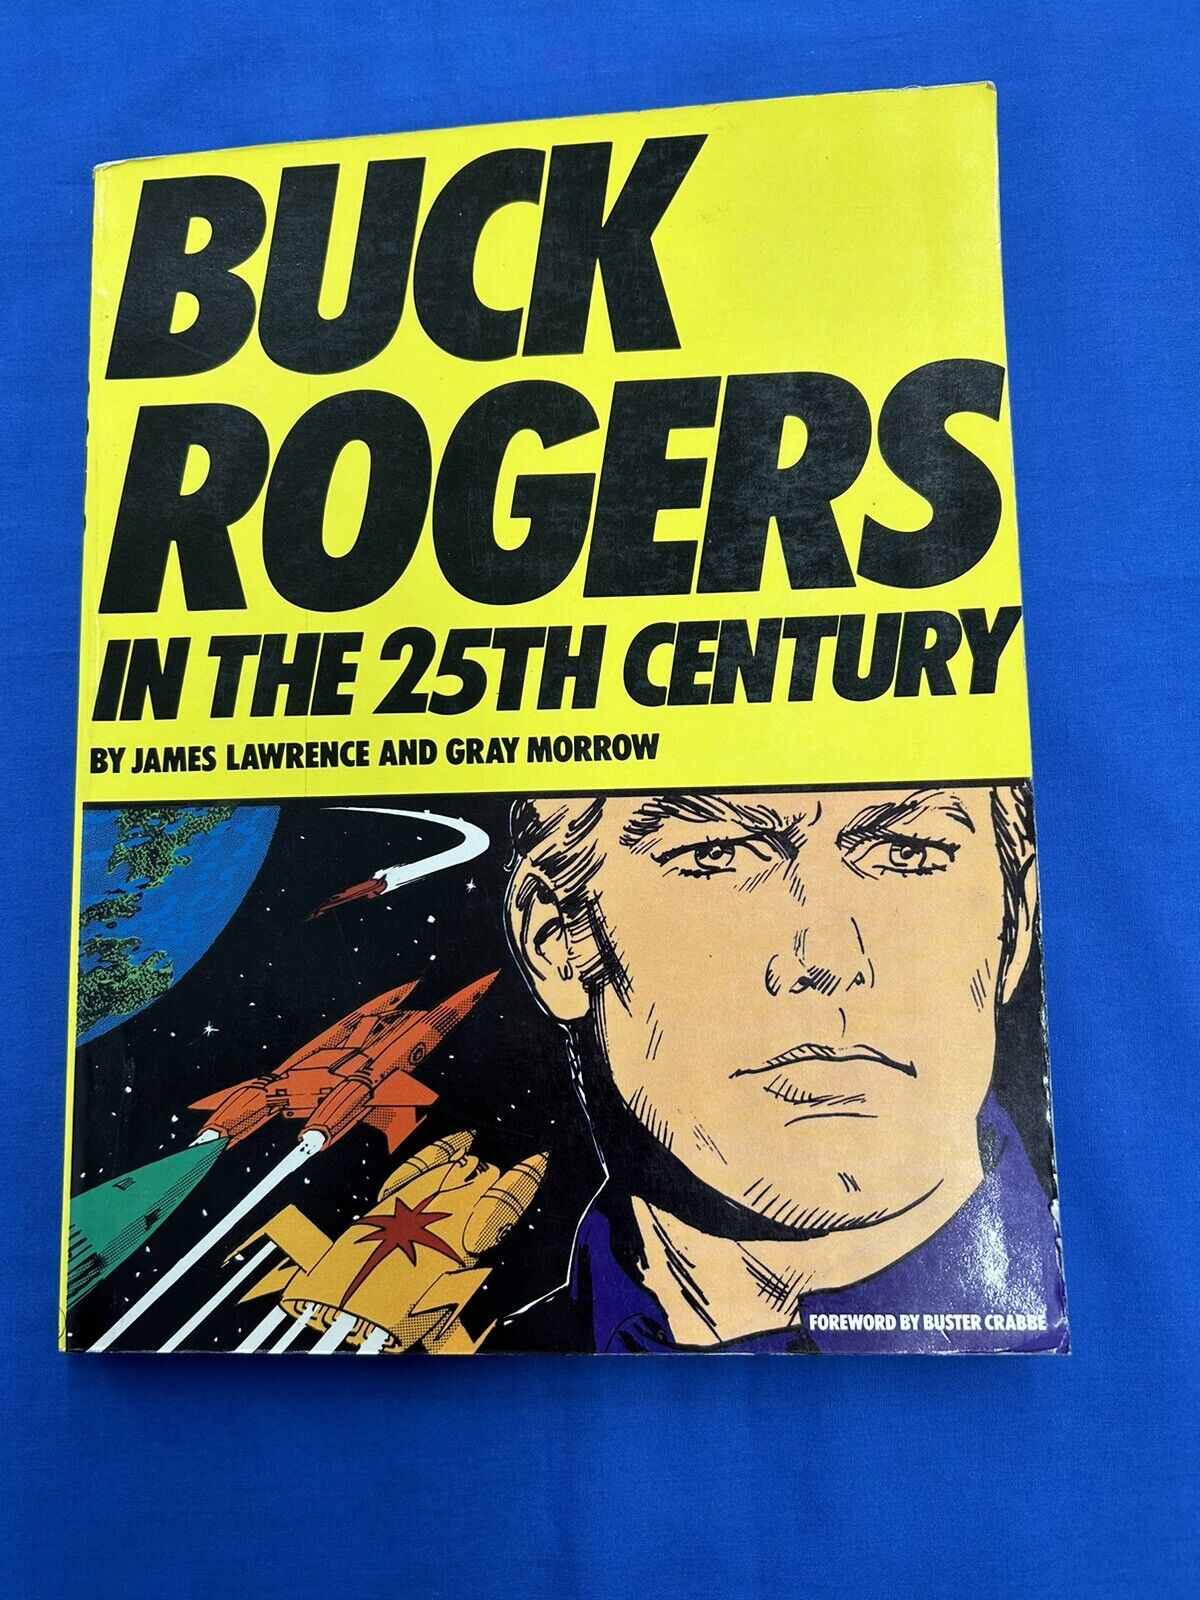 BUCK ROGERS IN THE 25TH CENTURY LAWRENCE MORROW QUICK FOX Comic Book